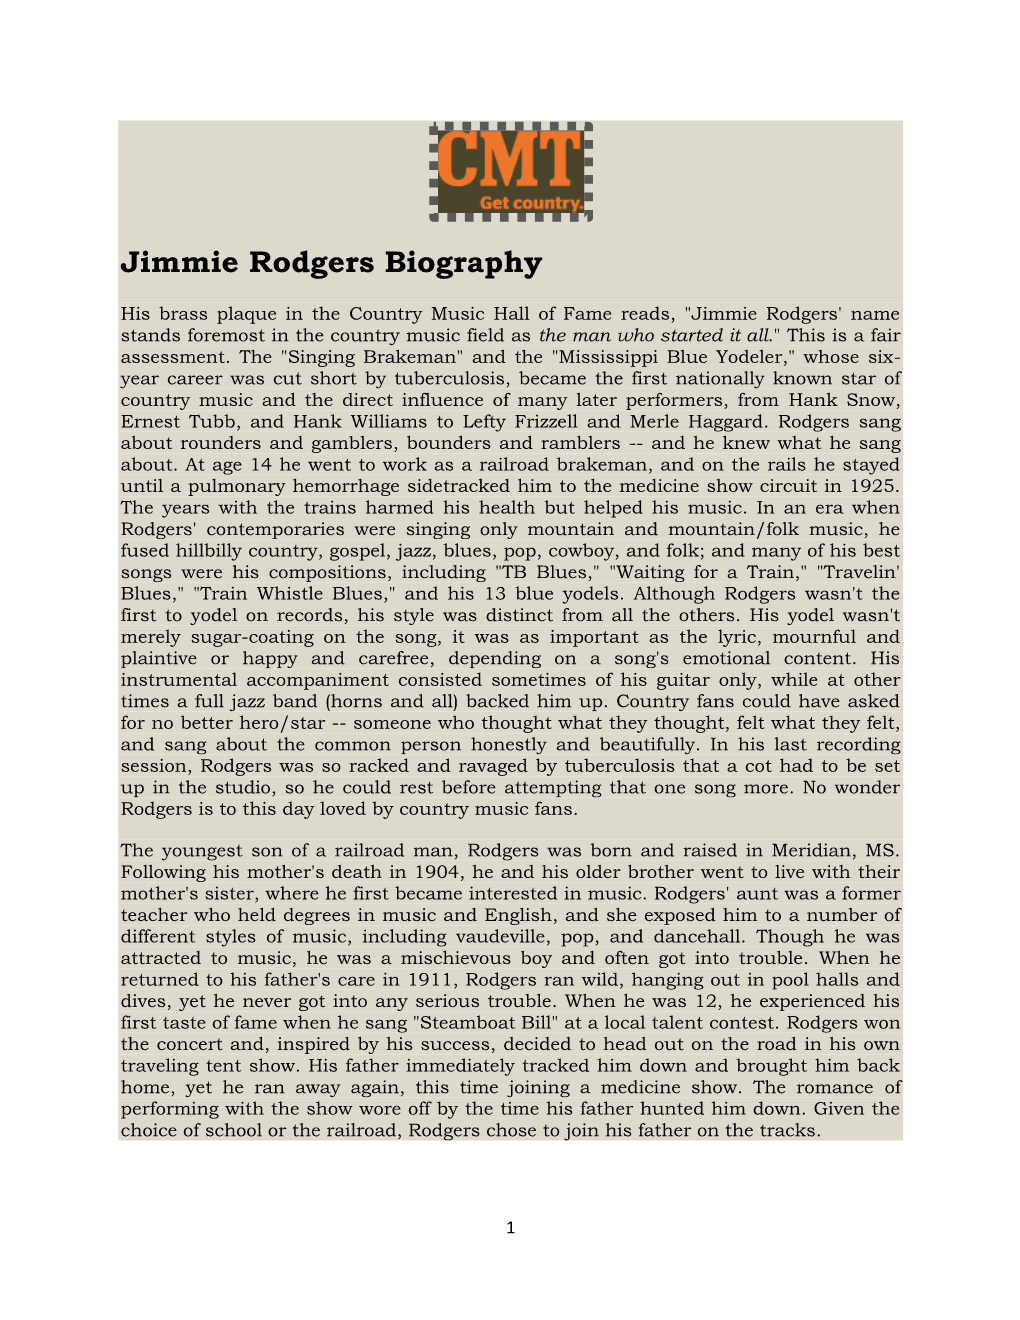 Jimmie Rodgers Biography